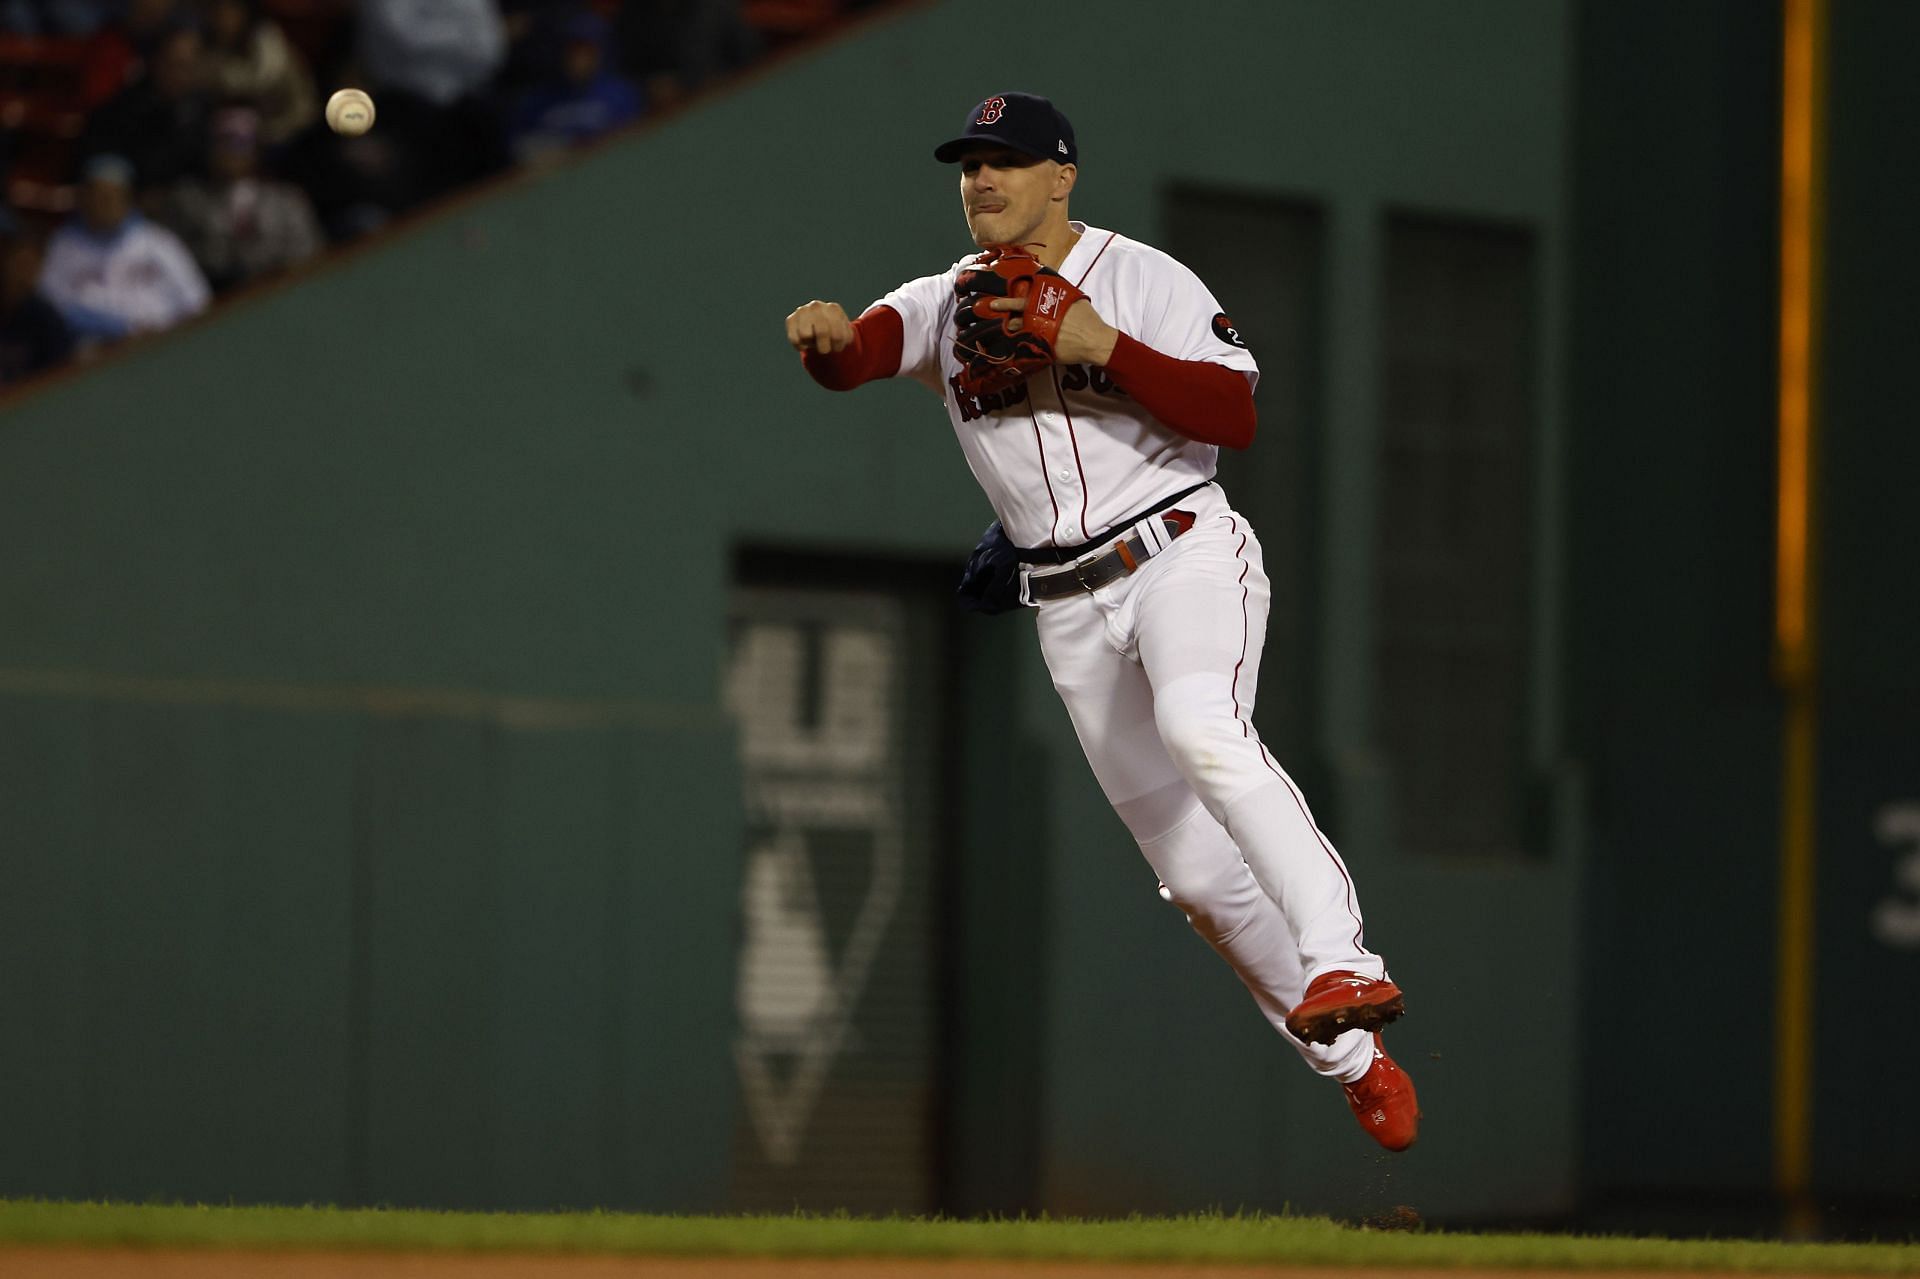 Enrique Hernandez for the Boston Red Sox